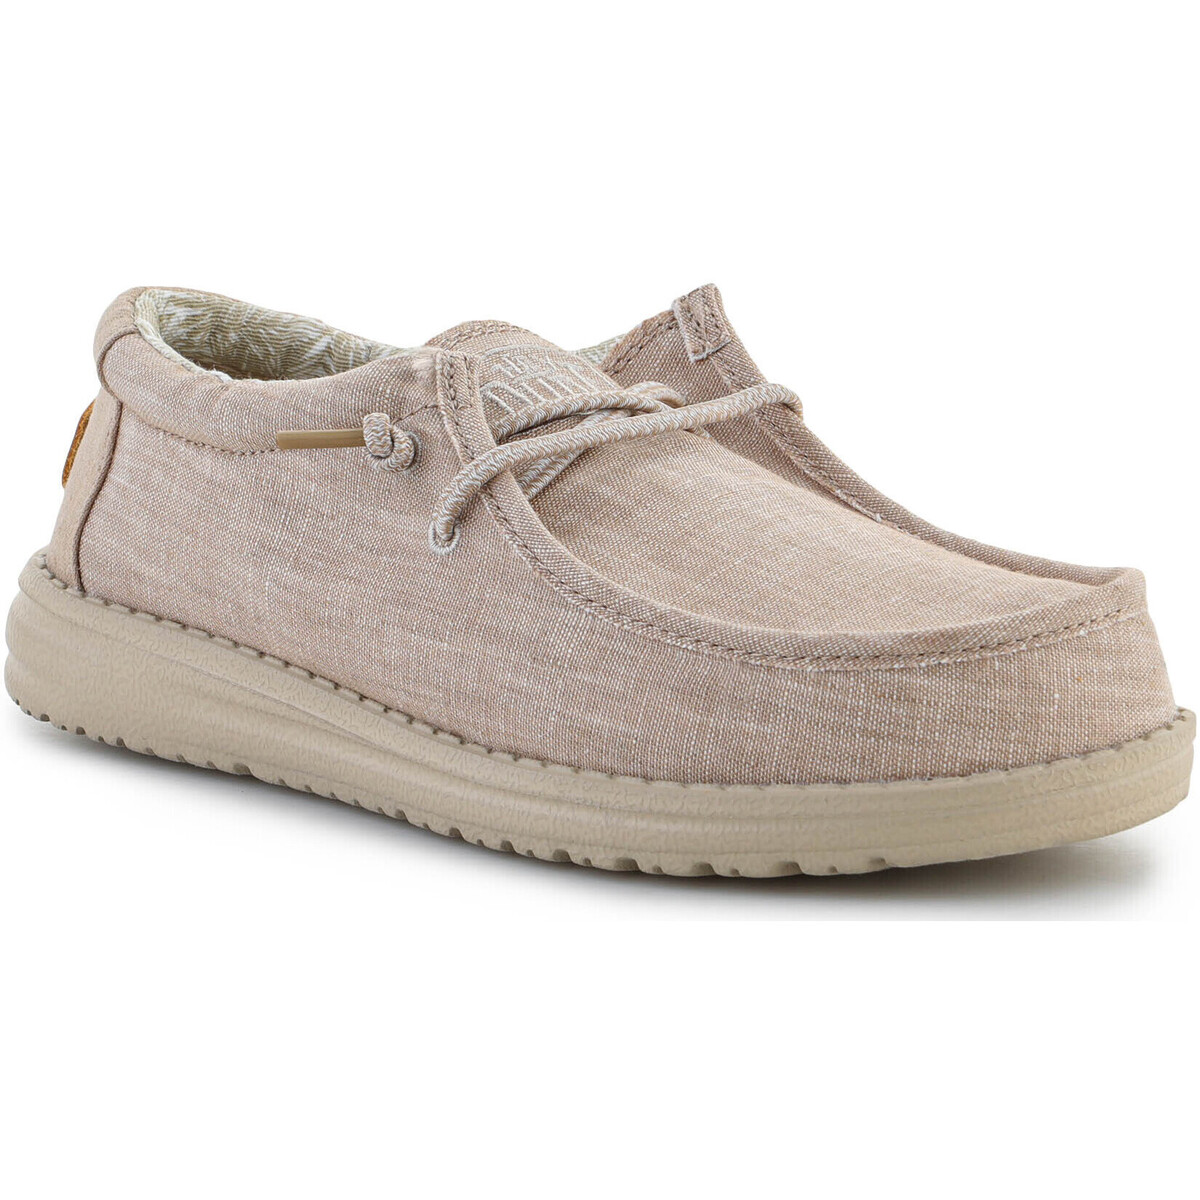 Shoes Trainers HEY DUDE Lifestyle shoes   Wally Youth Basic Beige 40041-205 Beige